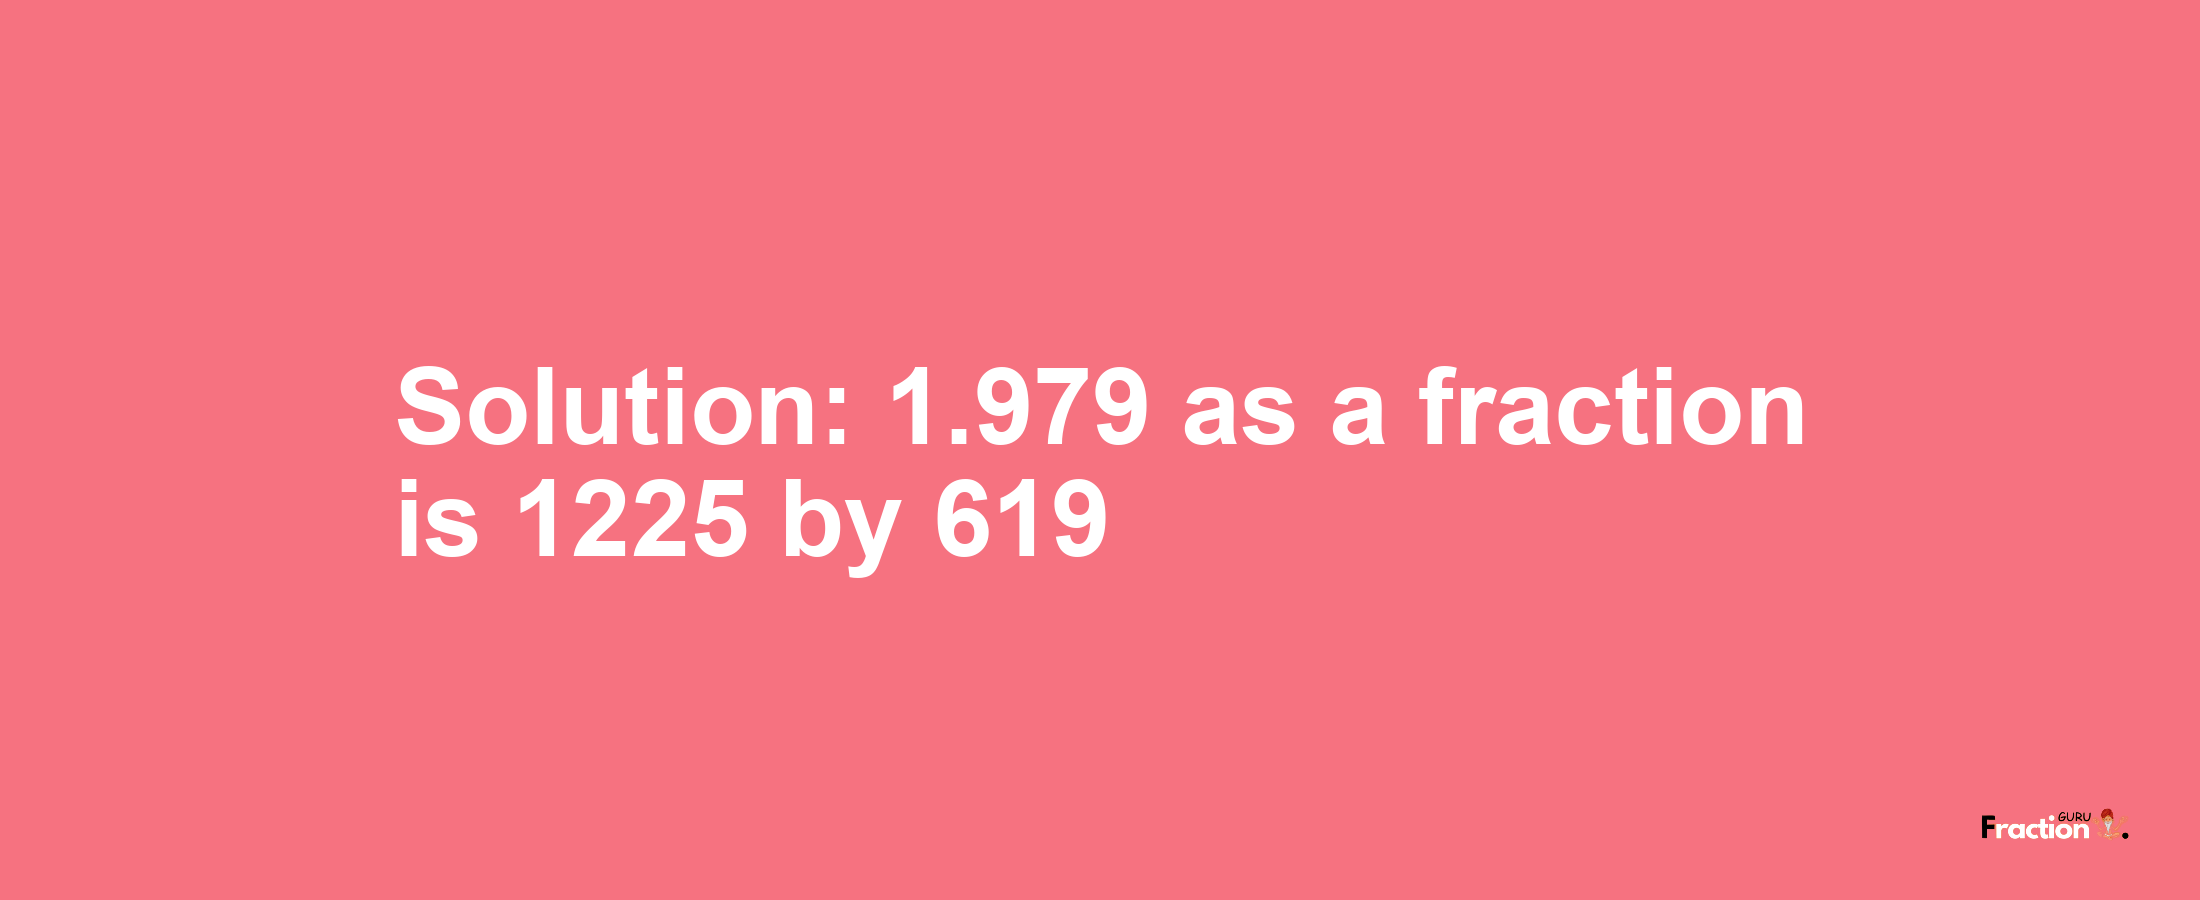 Solution:1.979 as a fraction is 1225/619